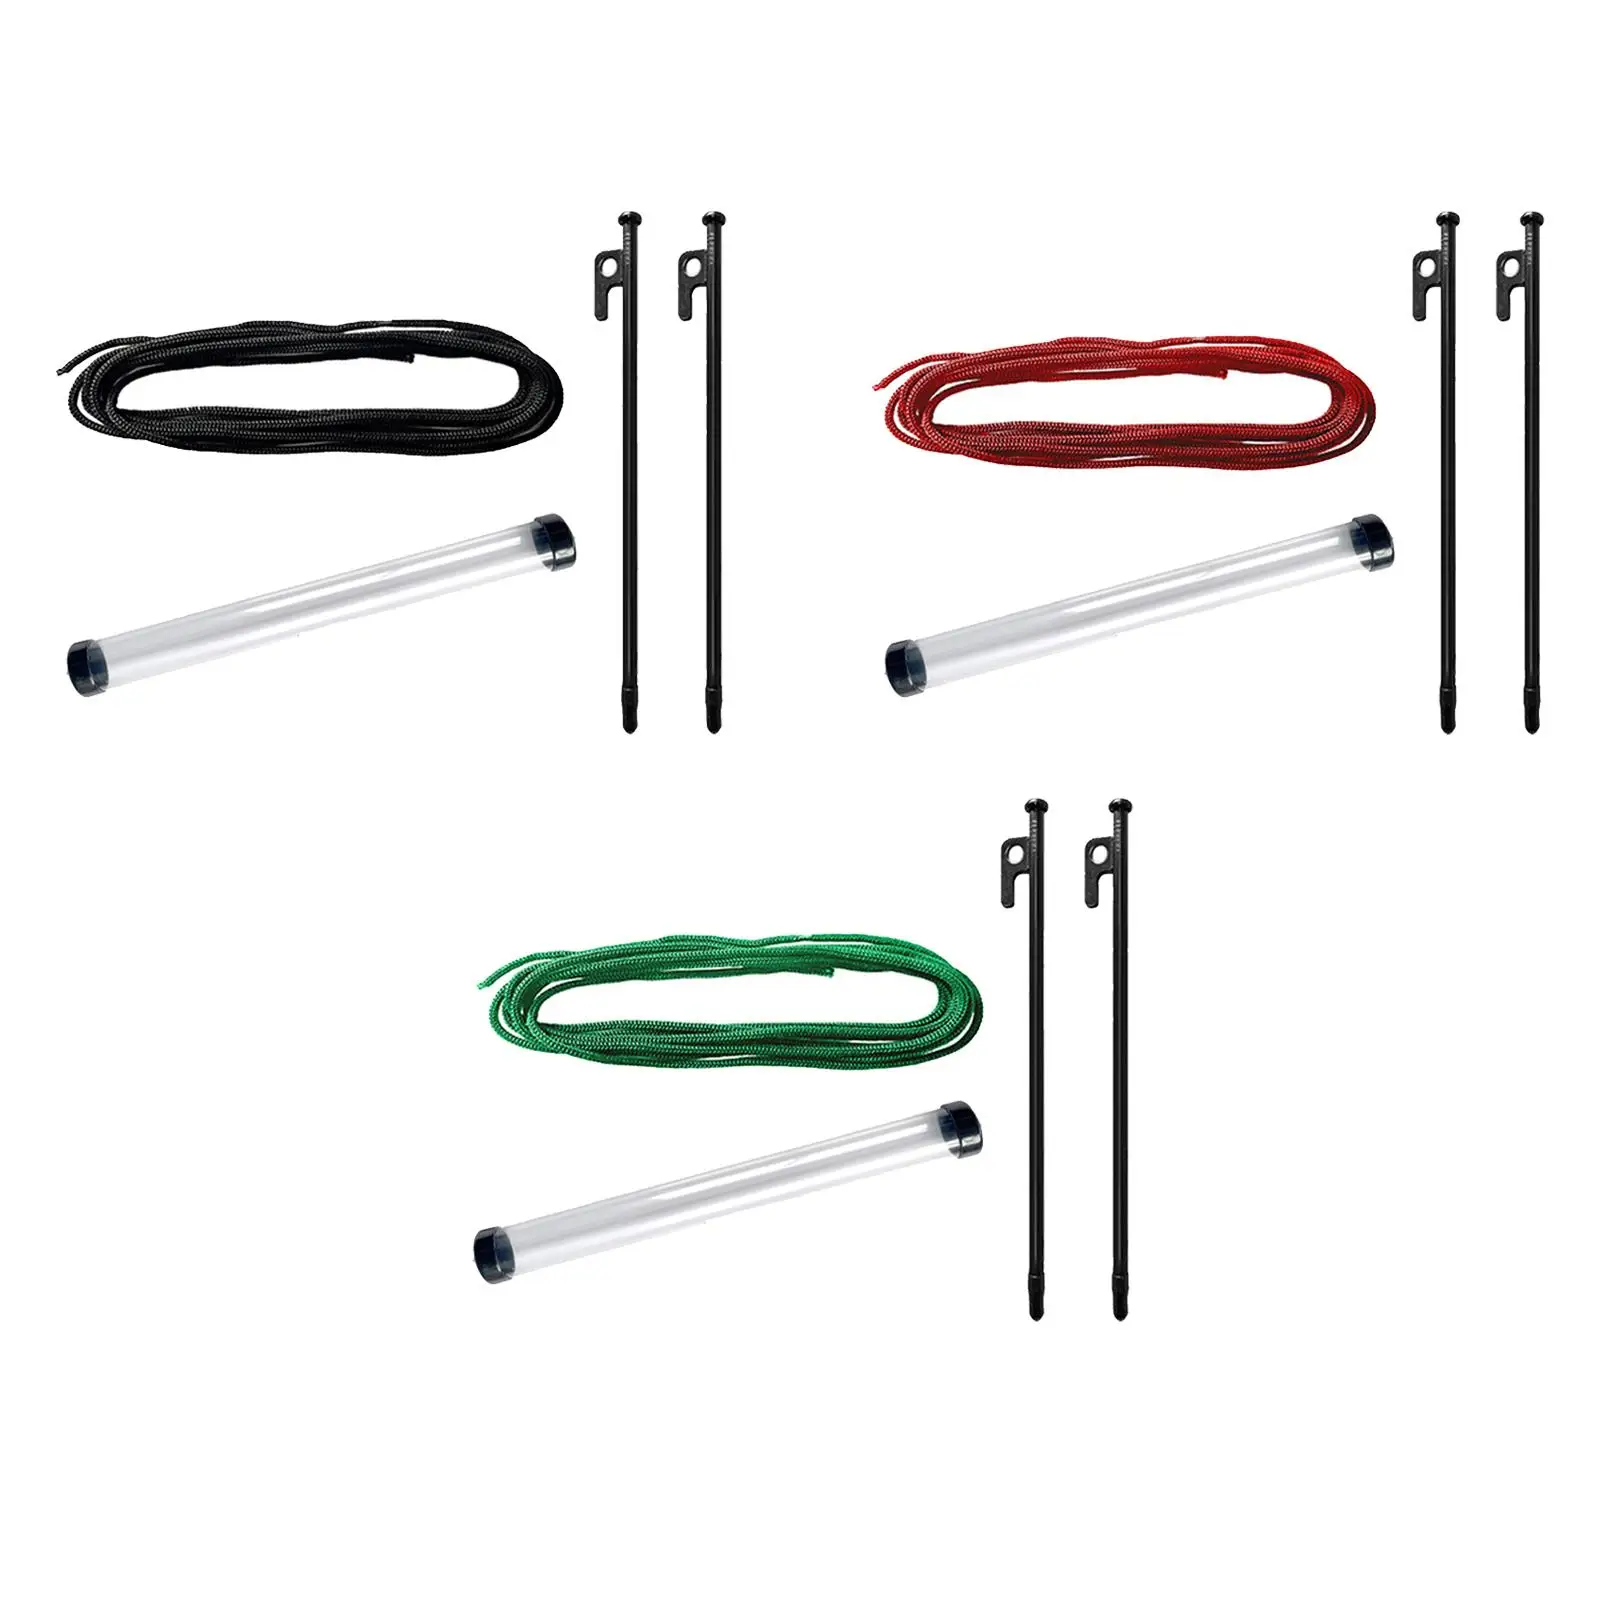 Golf alignment aid, swing accessory for the golfer putting with full